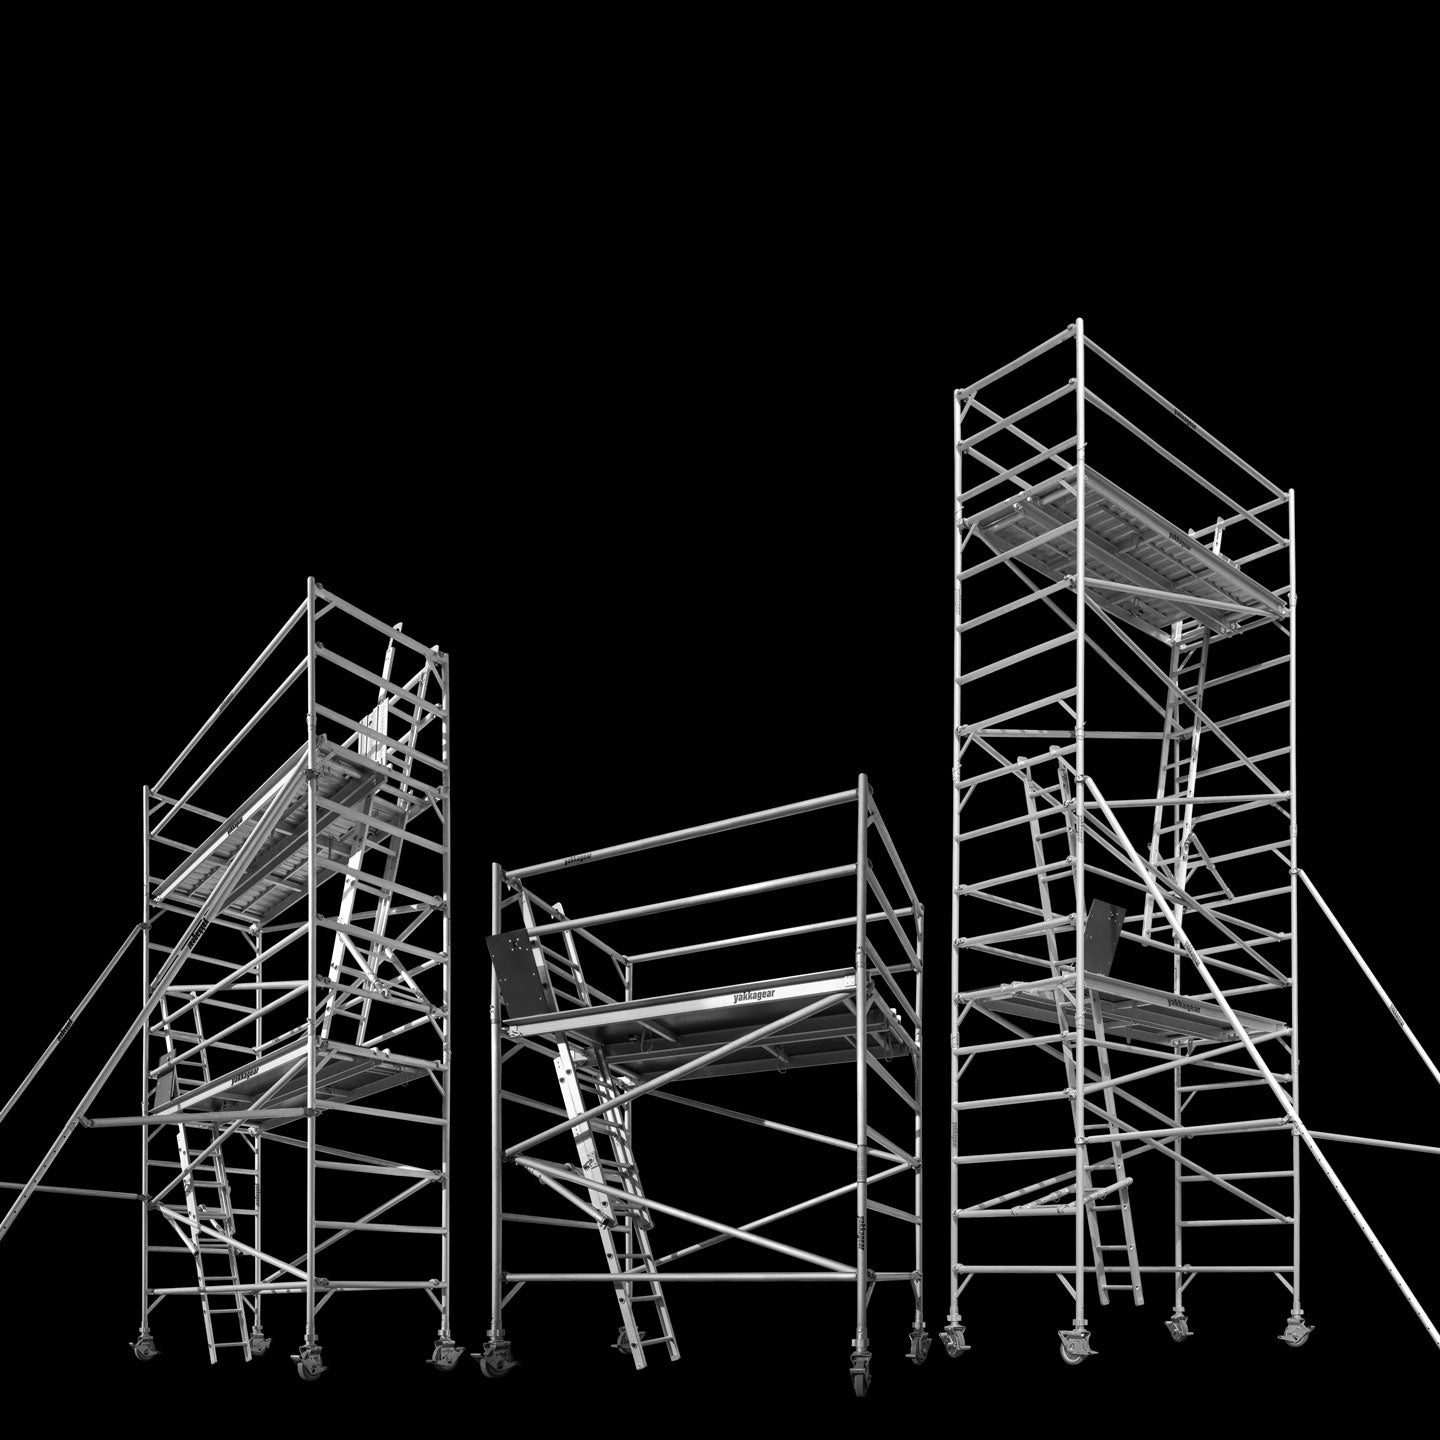 Yakka Gear Australia 2.5m Length 1.3m Wide 4.6m, 6.6m, and 8.6m reach wide scaffolding tower access equipment with working height of 2.6m, 4.6m, and 6.6m, view from the front angle, with black background. 